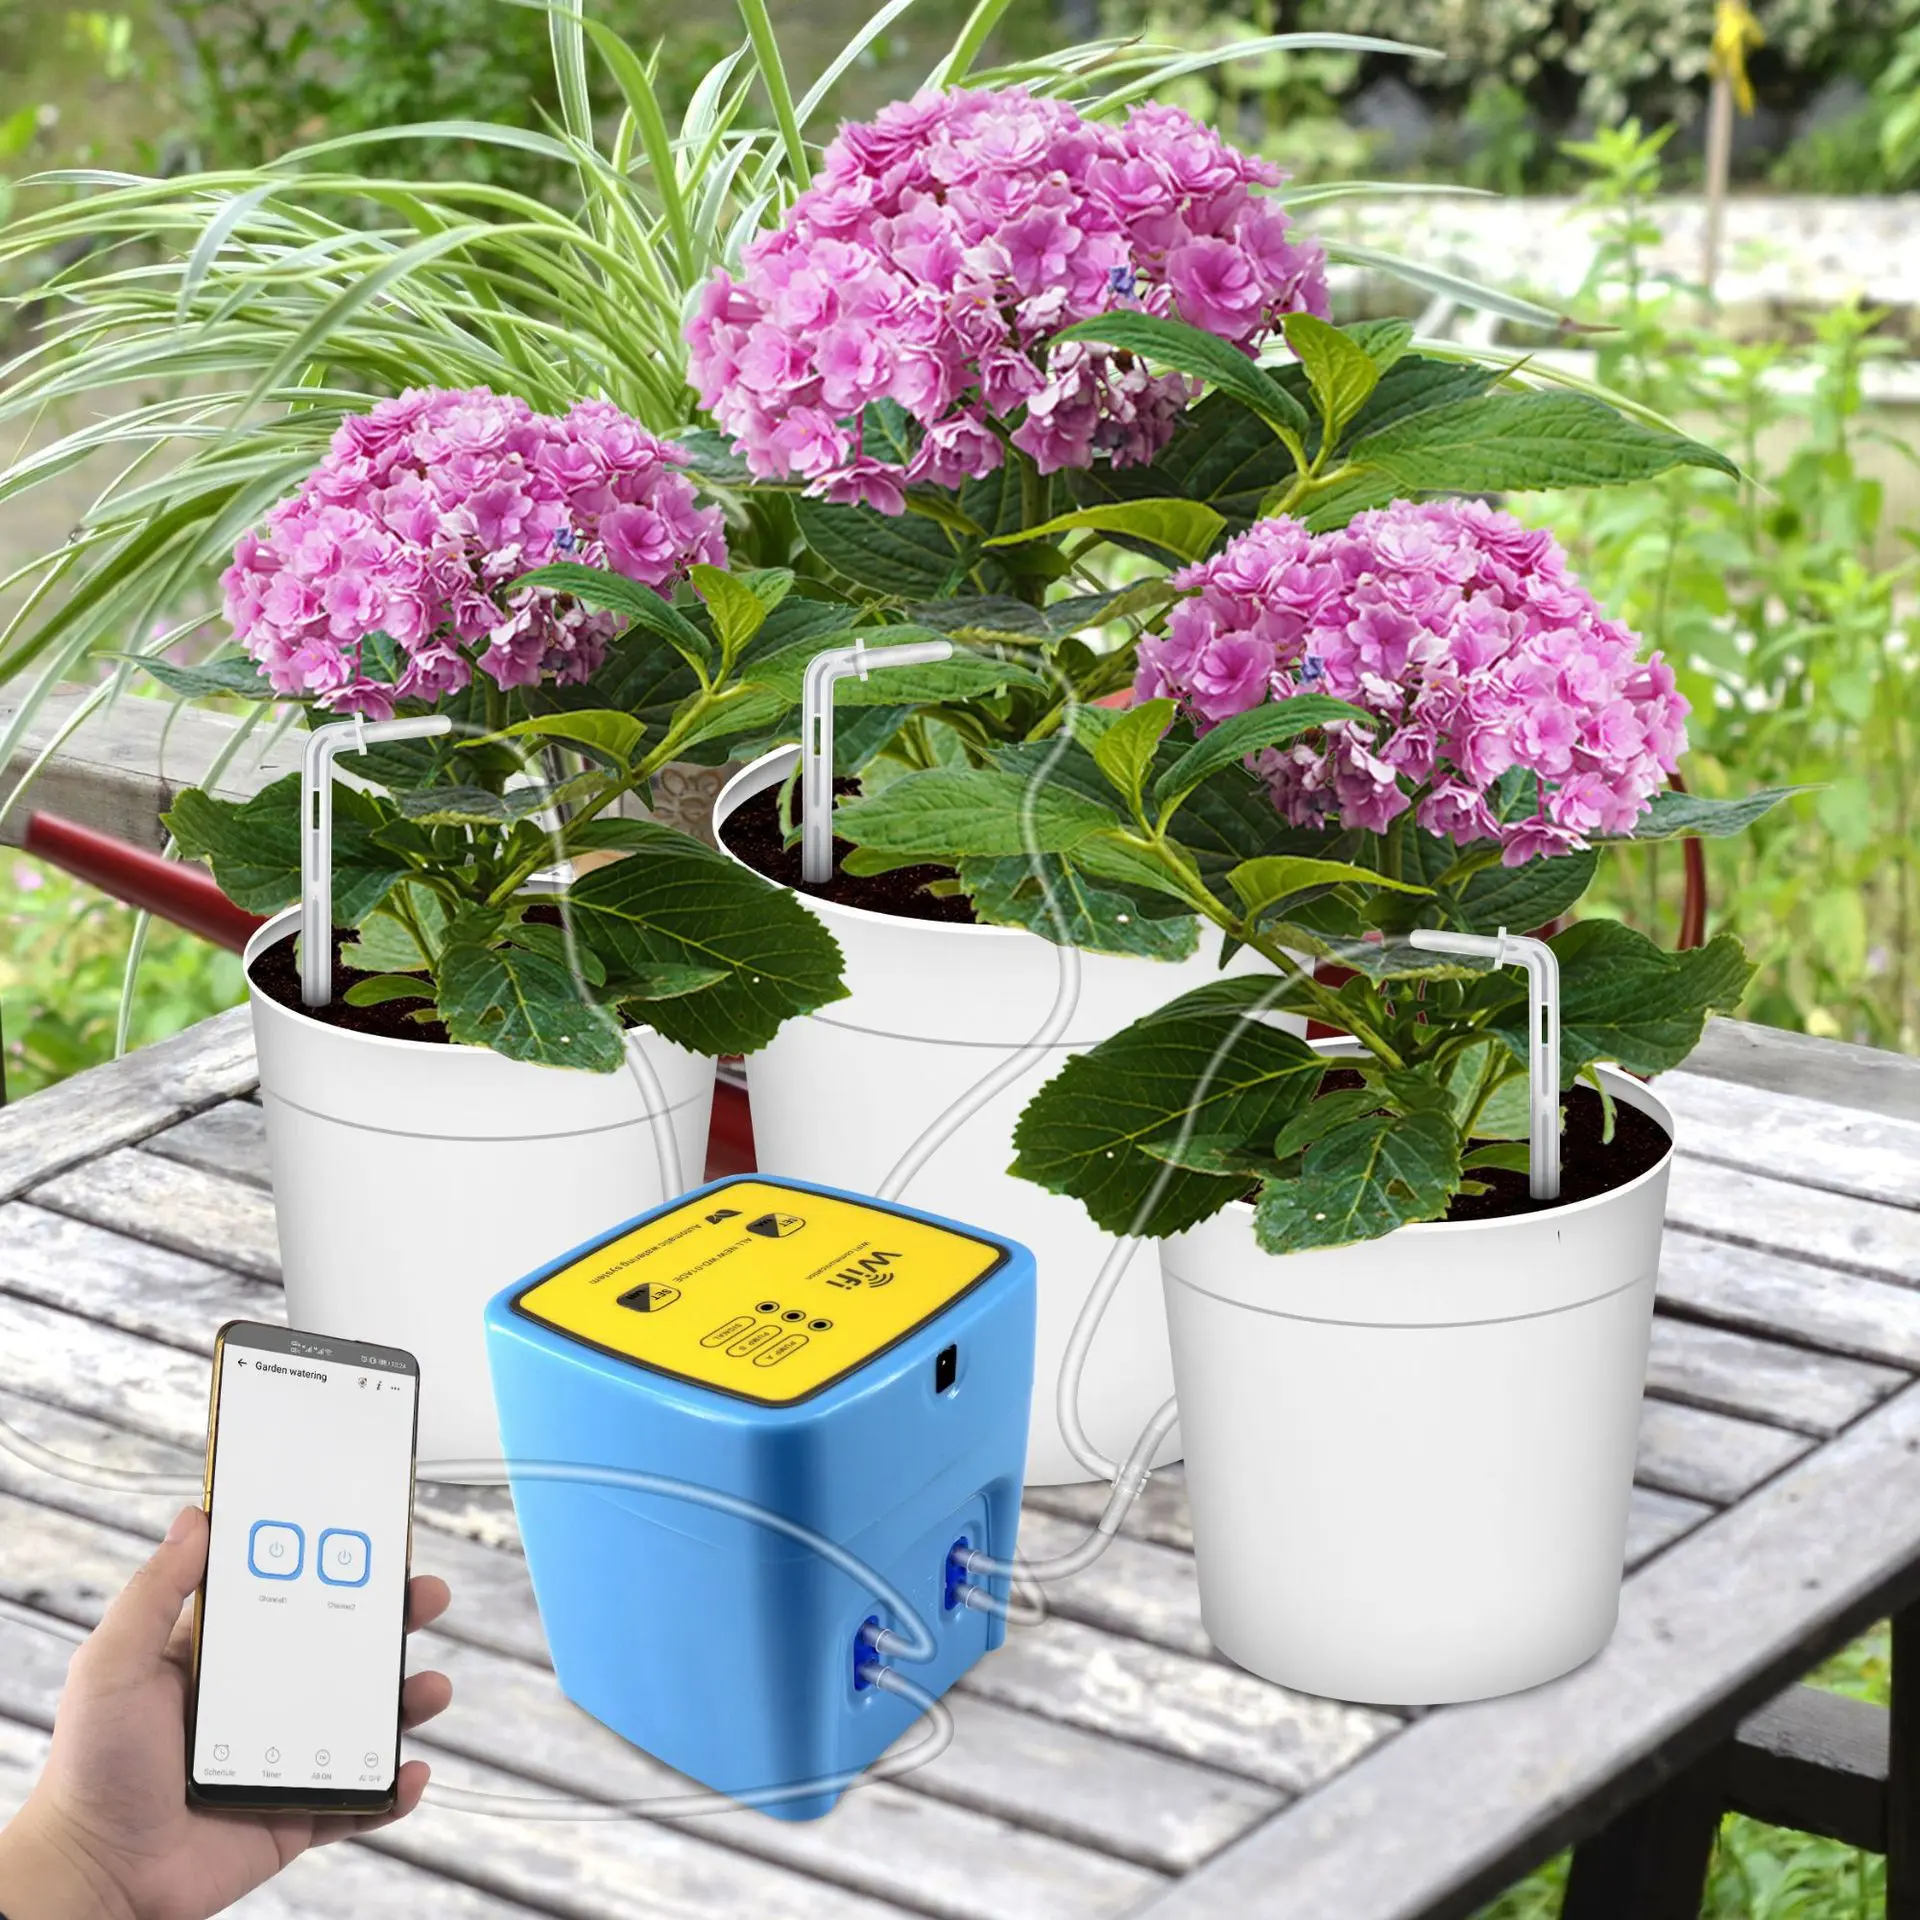 WiFi automatic waterer smart garden home potted lazy waterer drip irrigation mobile phone remote control can water 20 pots